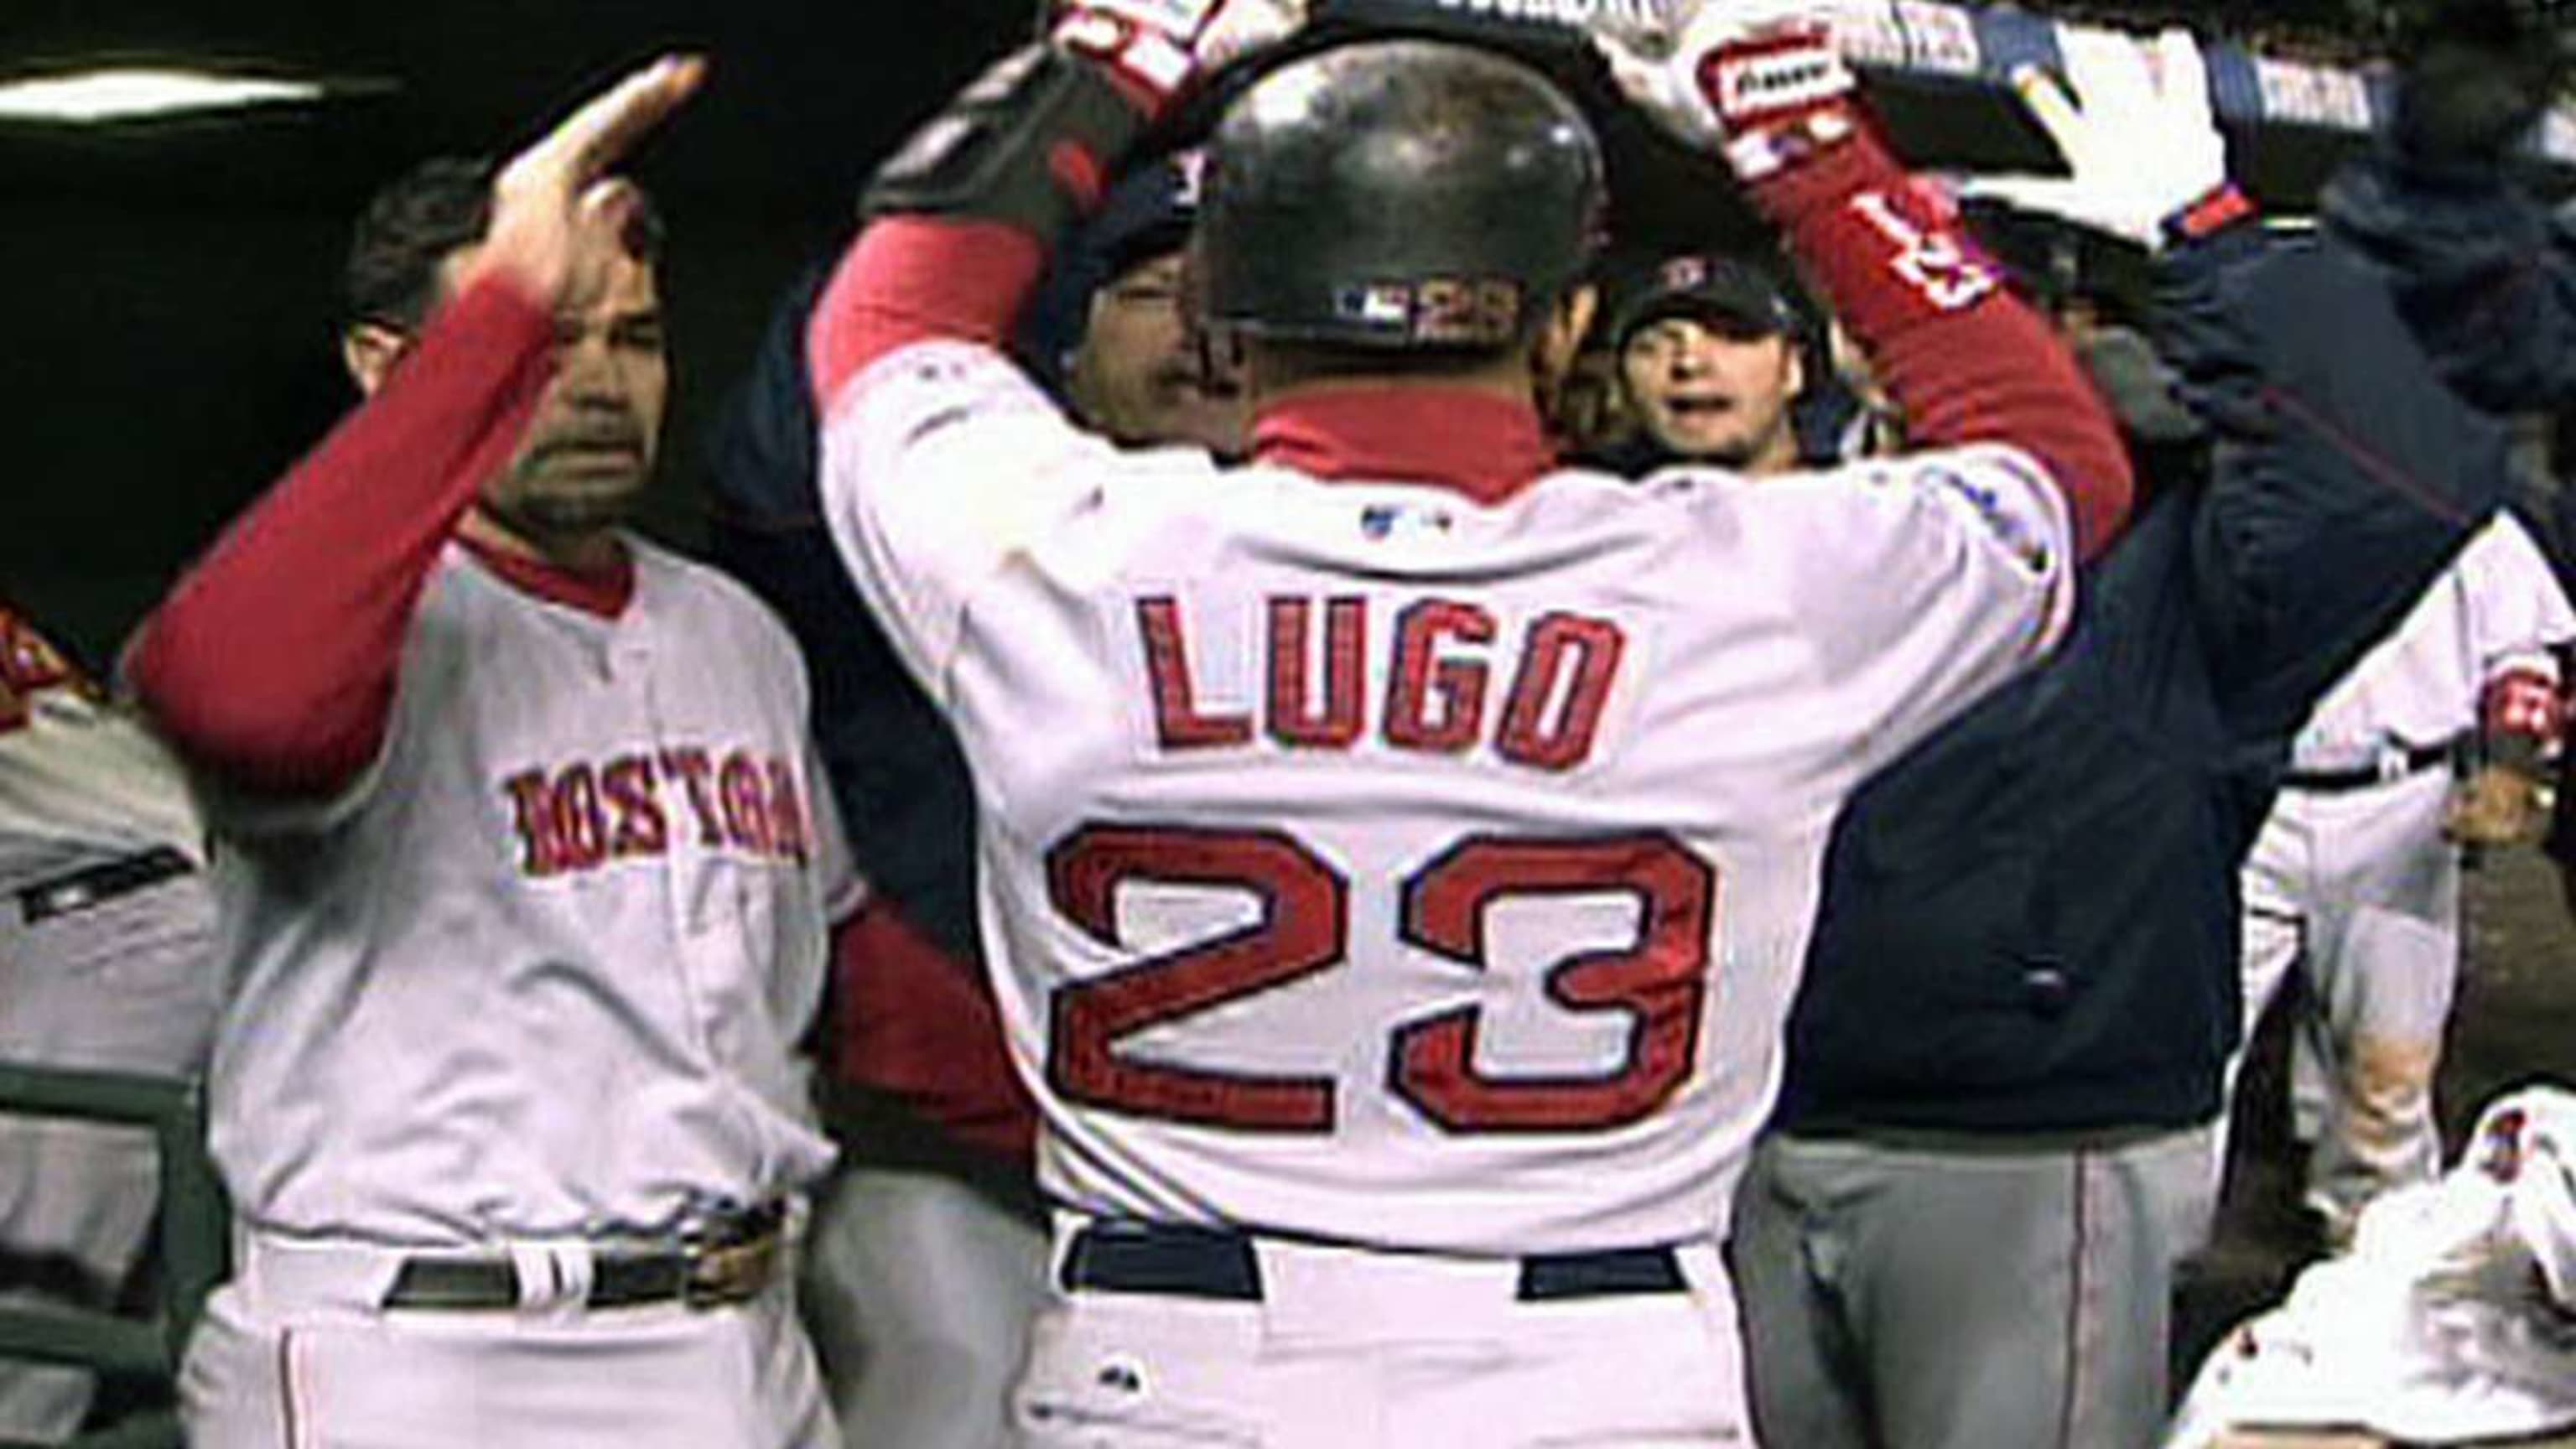 Boston Red Sox rookies Dustin Pedroia, Jacoby Ellsbury set pace for 2007  World Series champions 